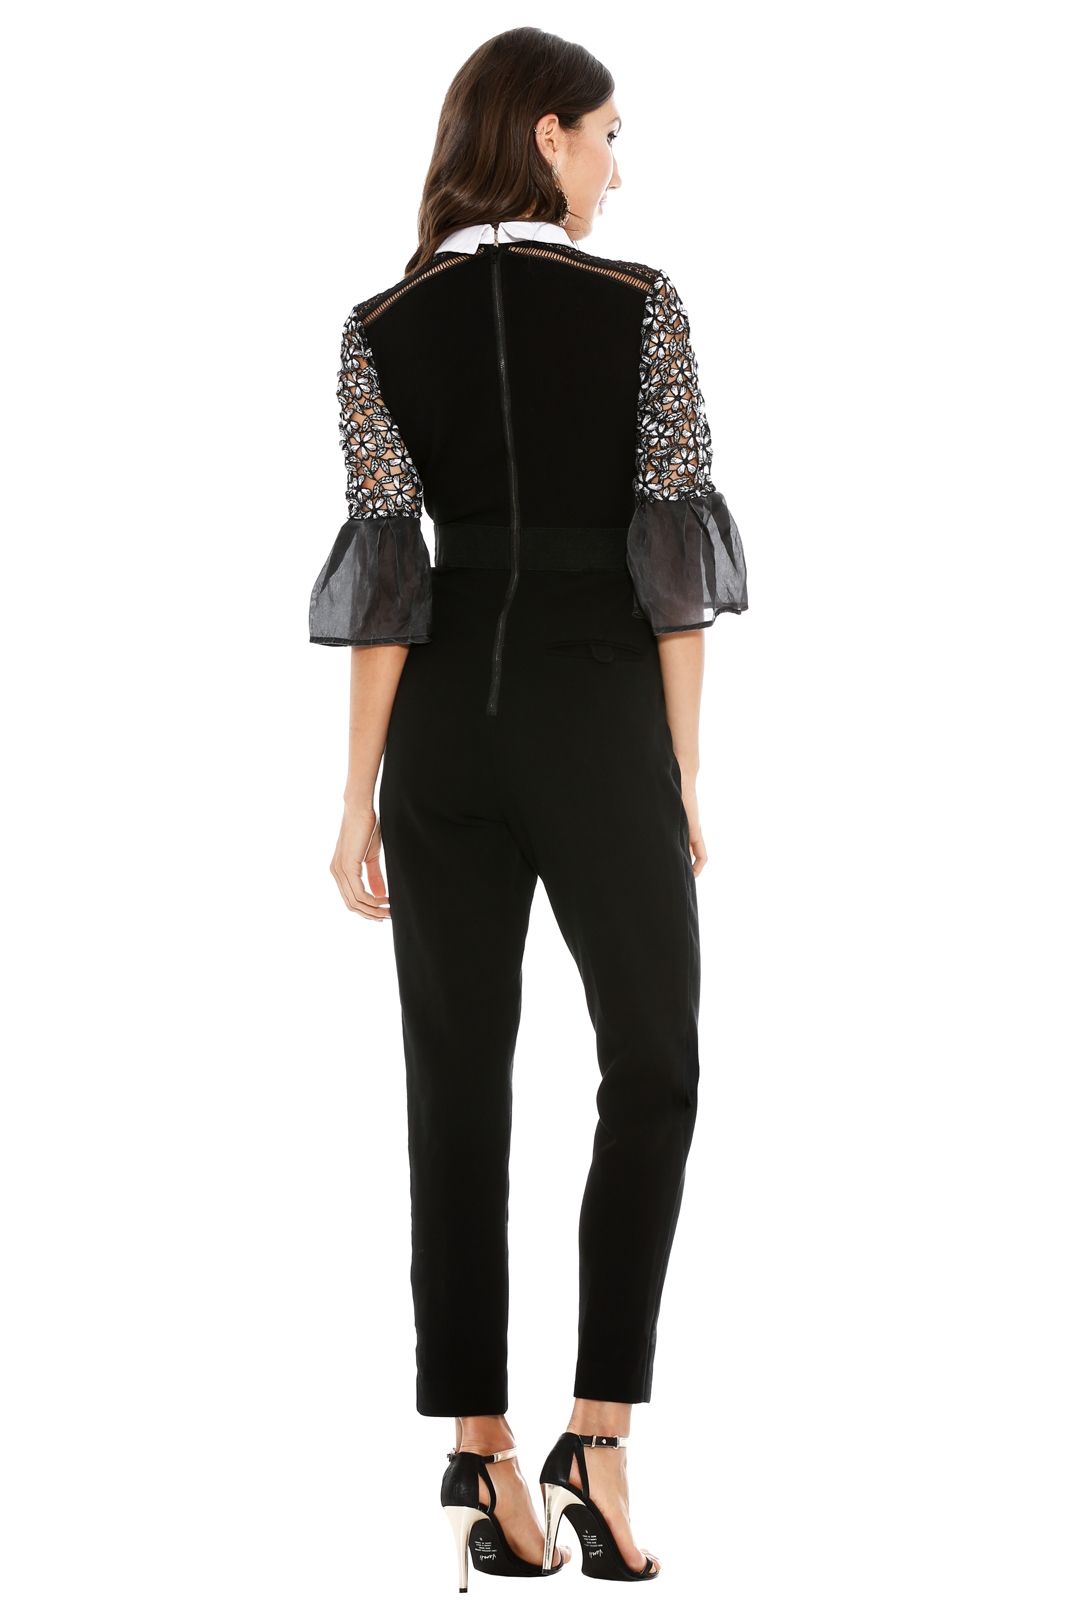 Self Portrait - Bell Sleeve Jumpsuit with Collar - Black - Back